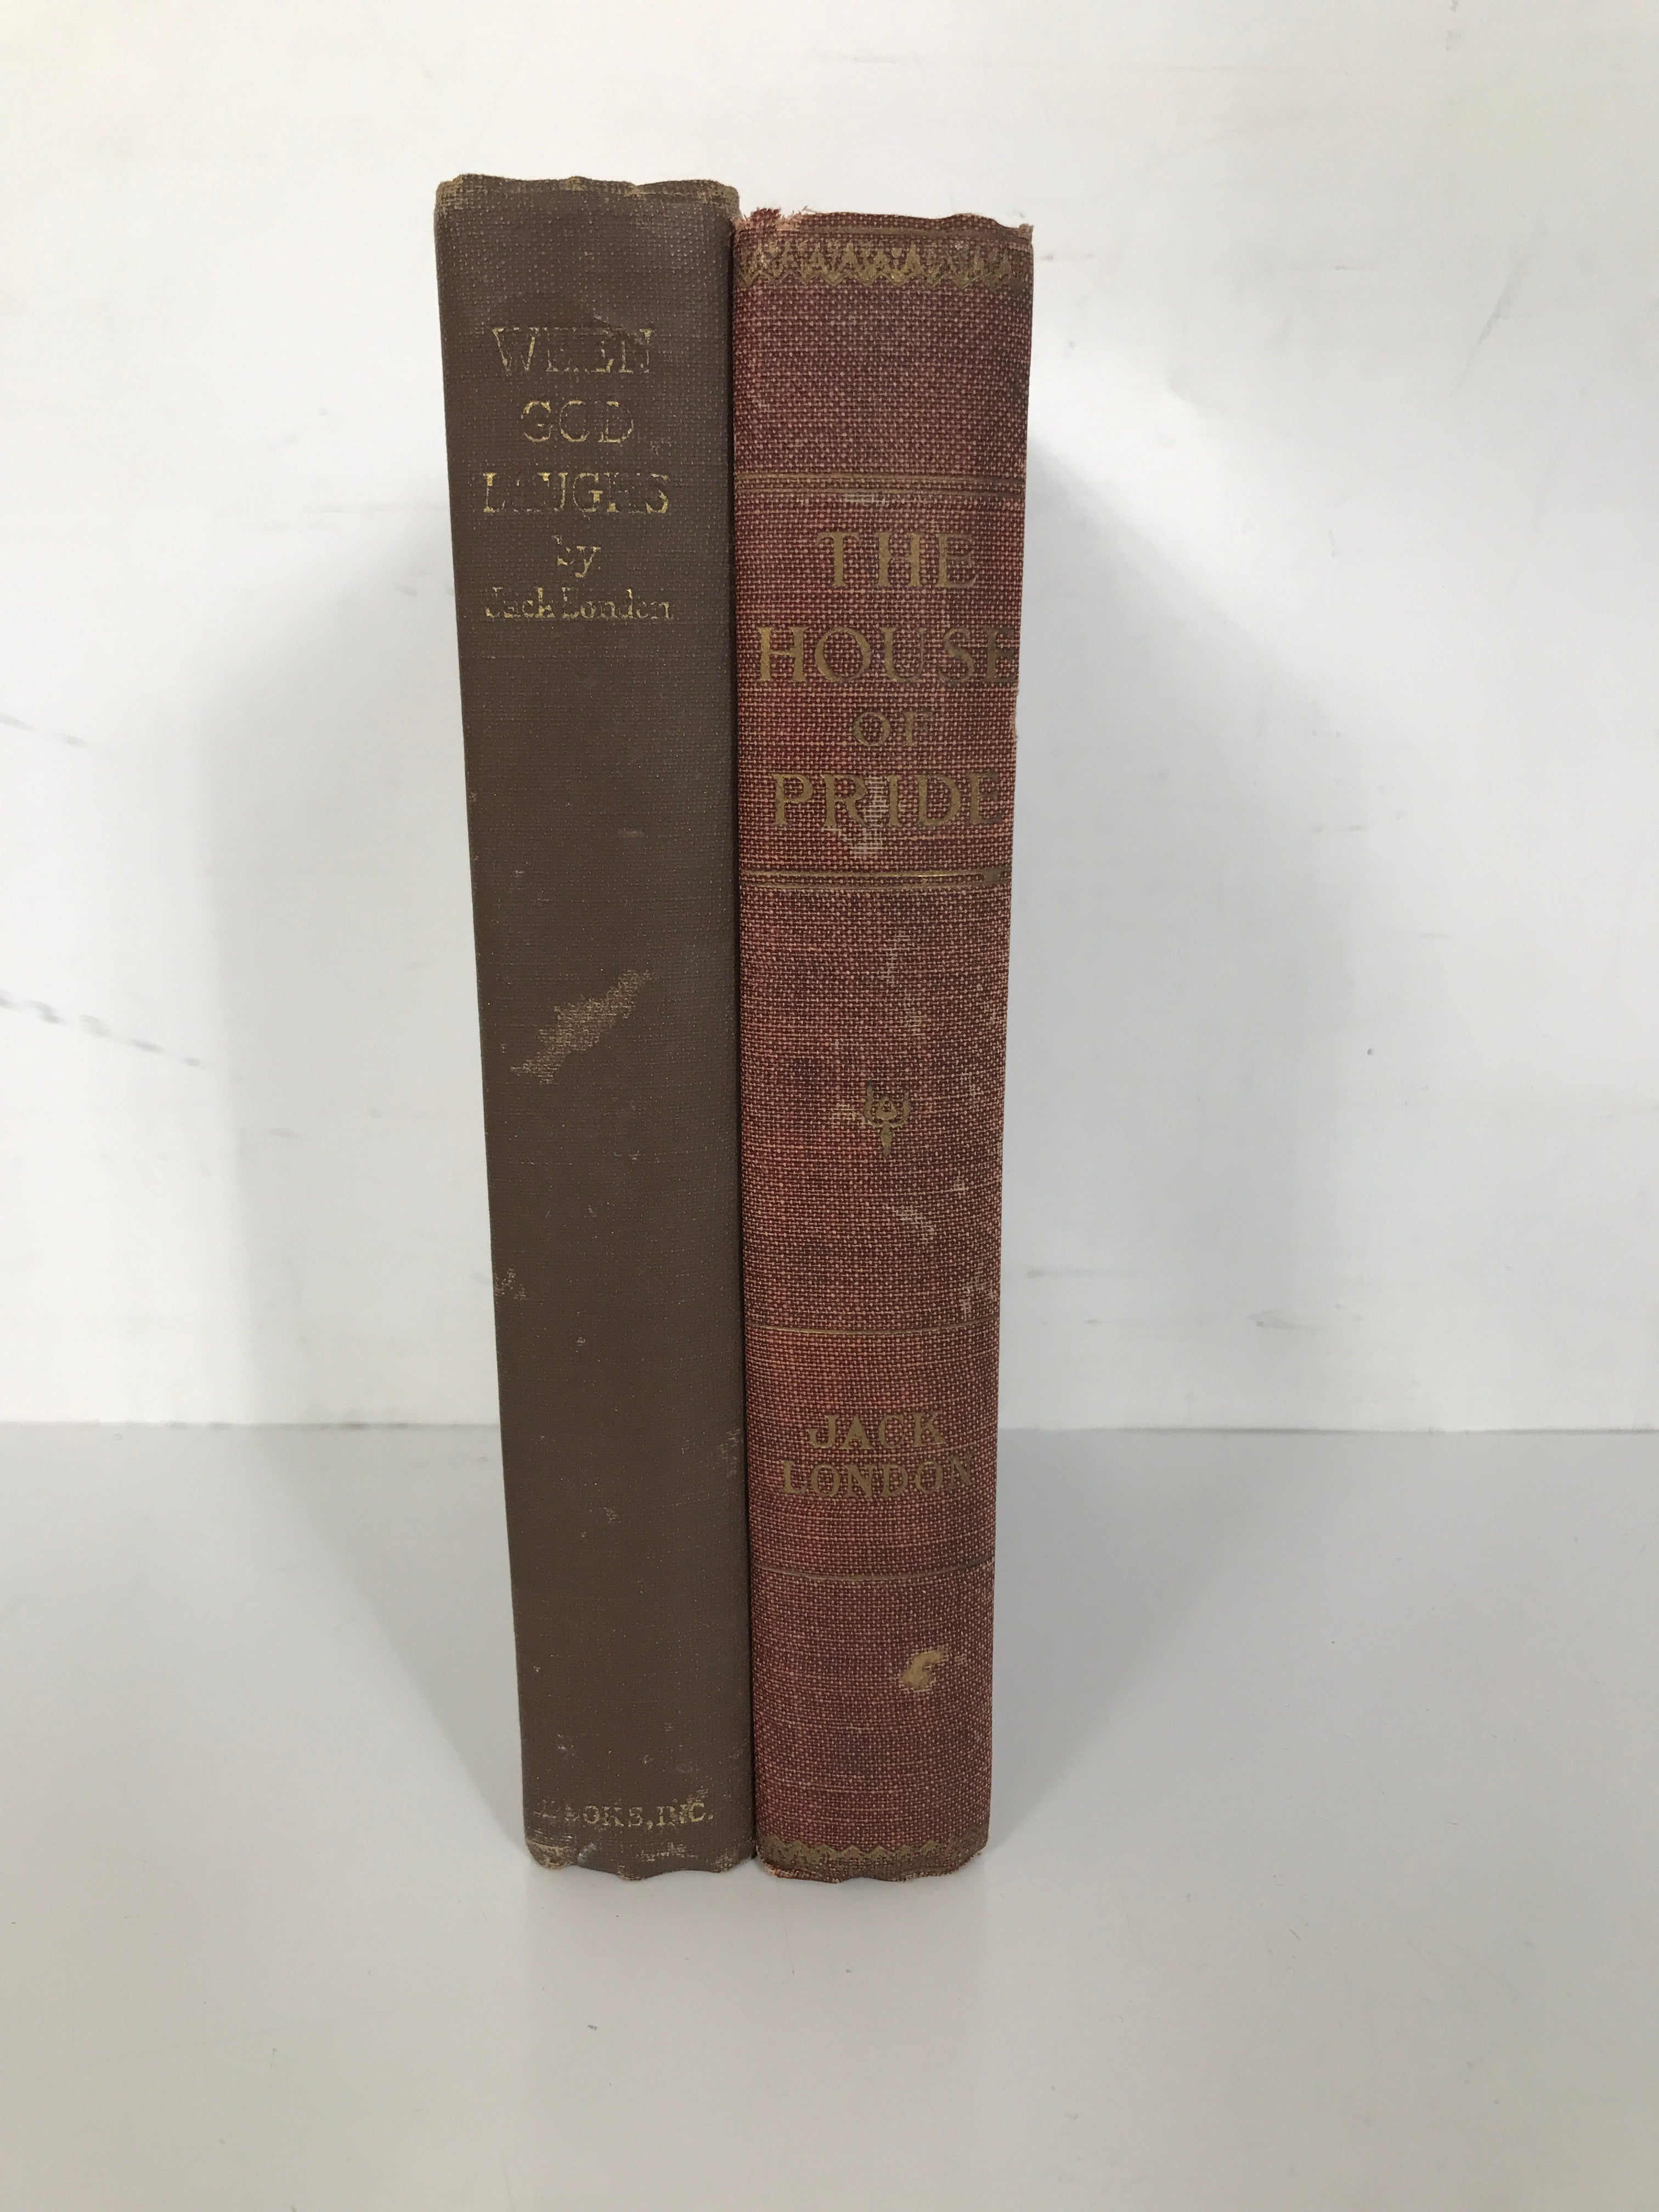 Lot of 2 Jack London: The House of Pride 1915 & When God Laughs 1945 HC